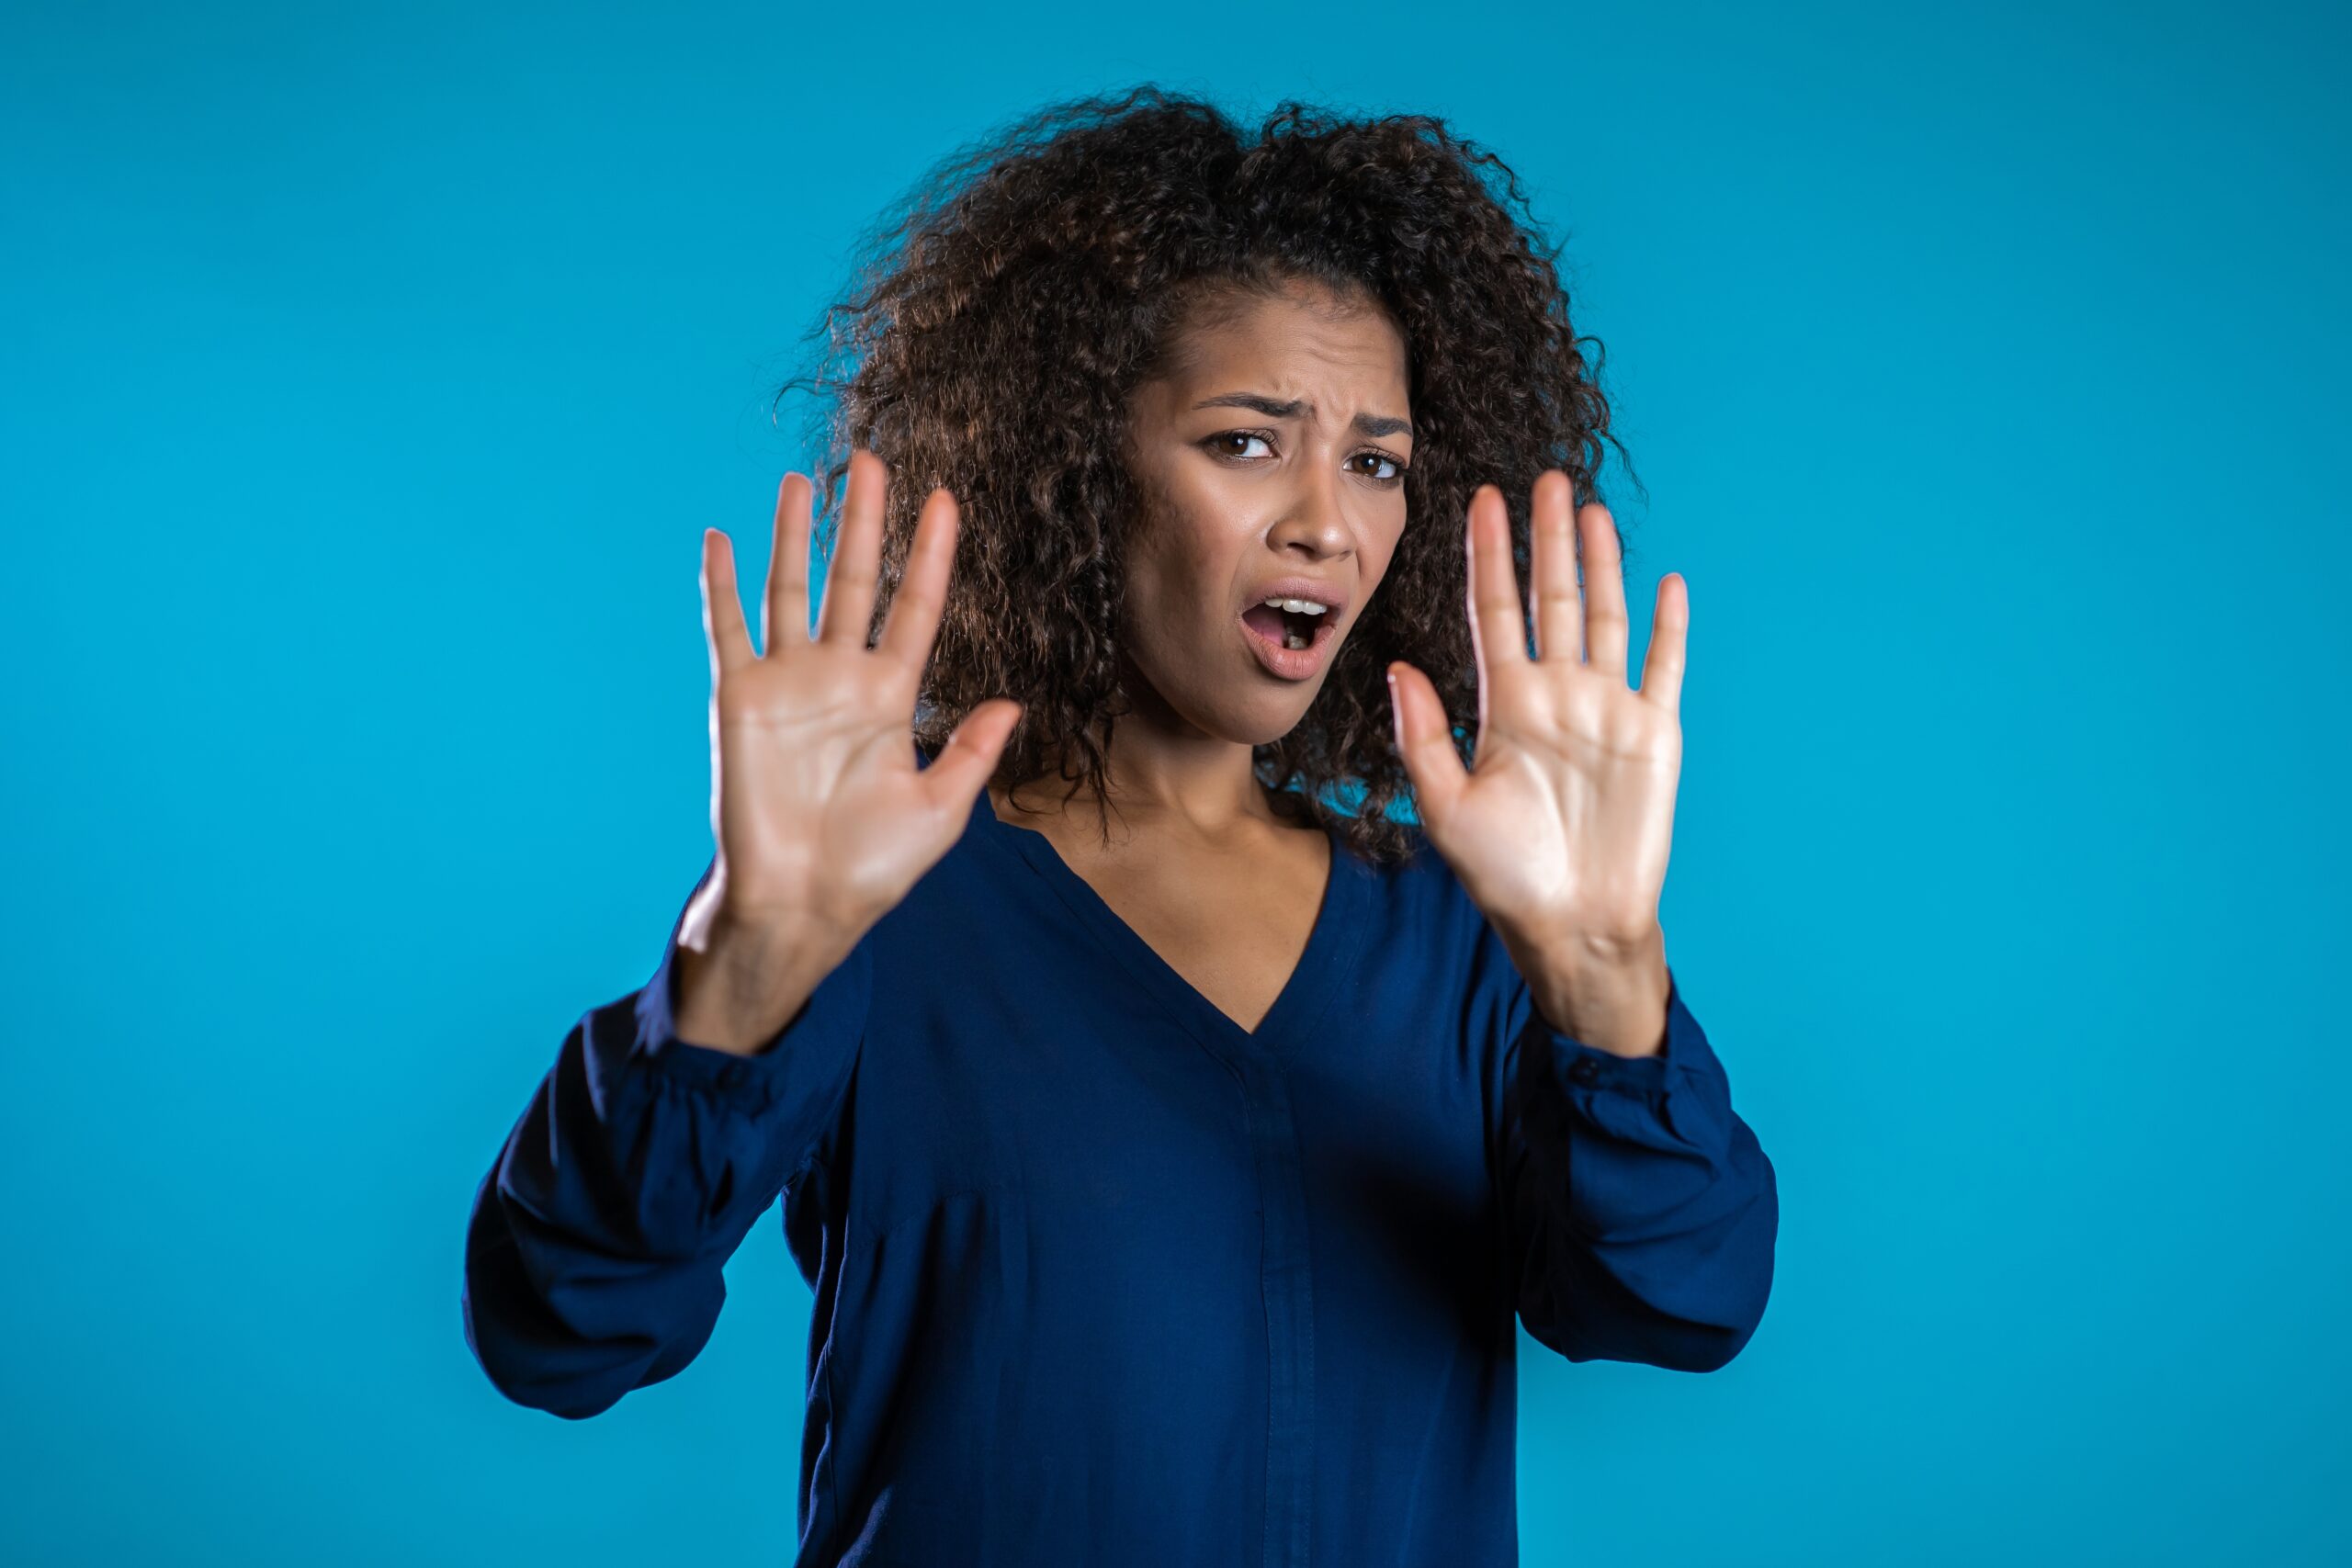 An image depicting a woman extending her hand in a stopping gesture to signify rejection, visually capturing the emotional weight and complexity of the fear of rejection in personal relationships.